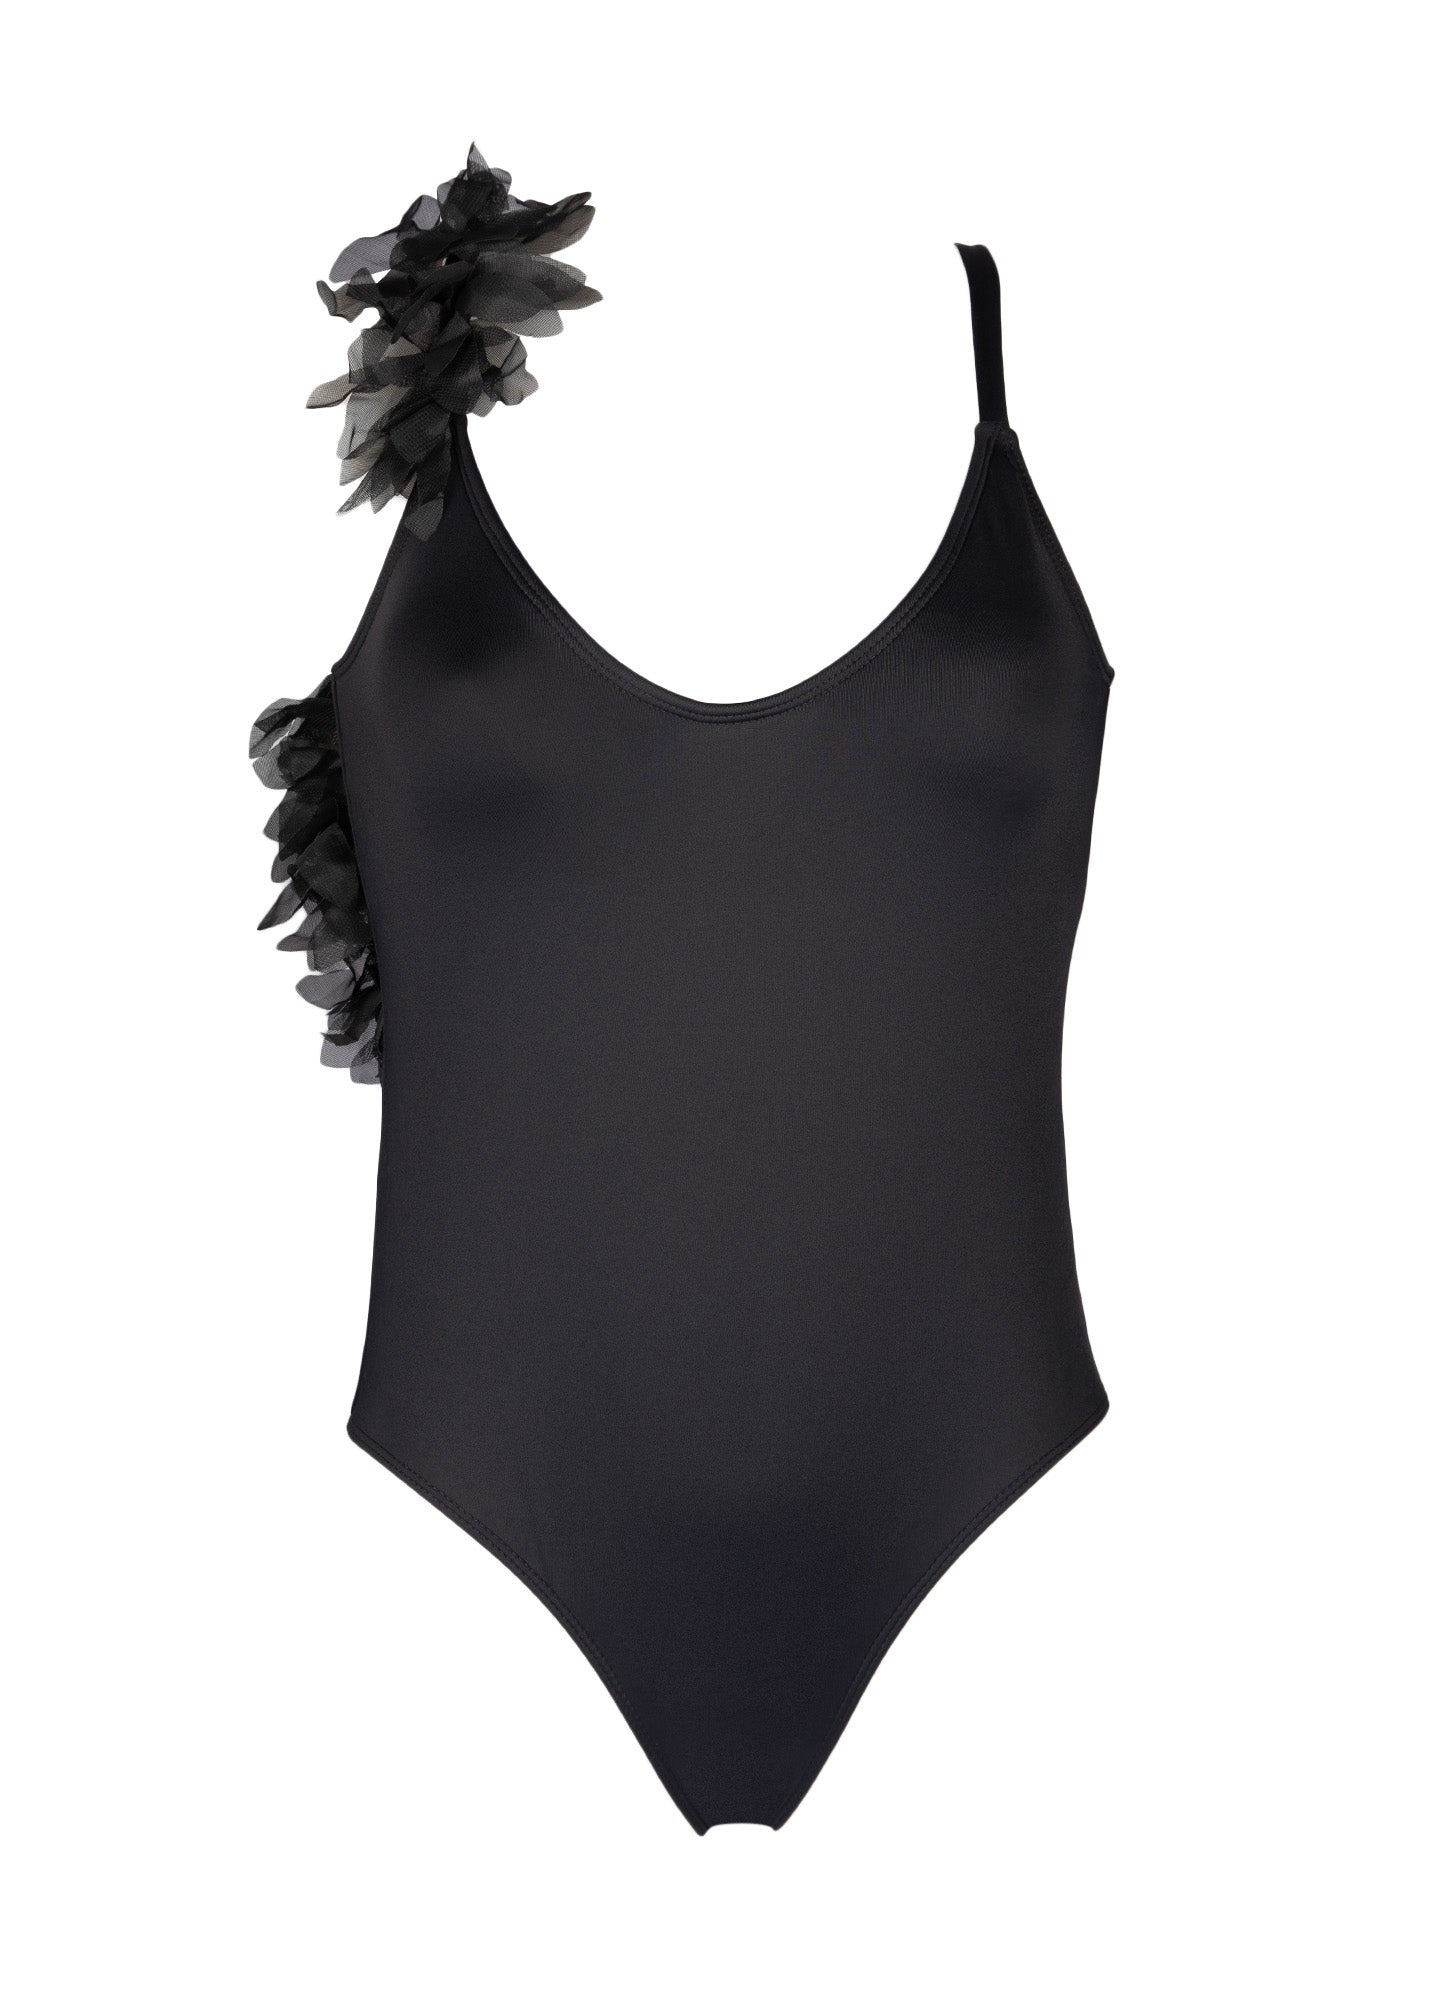 black one-piece swimsuit with chiffon leaves